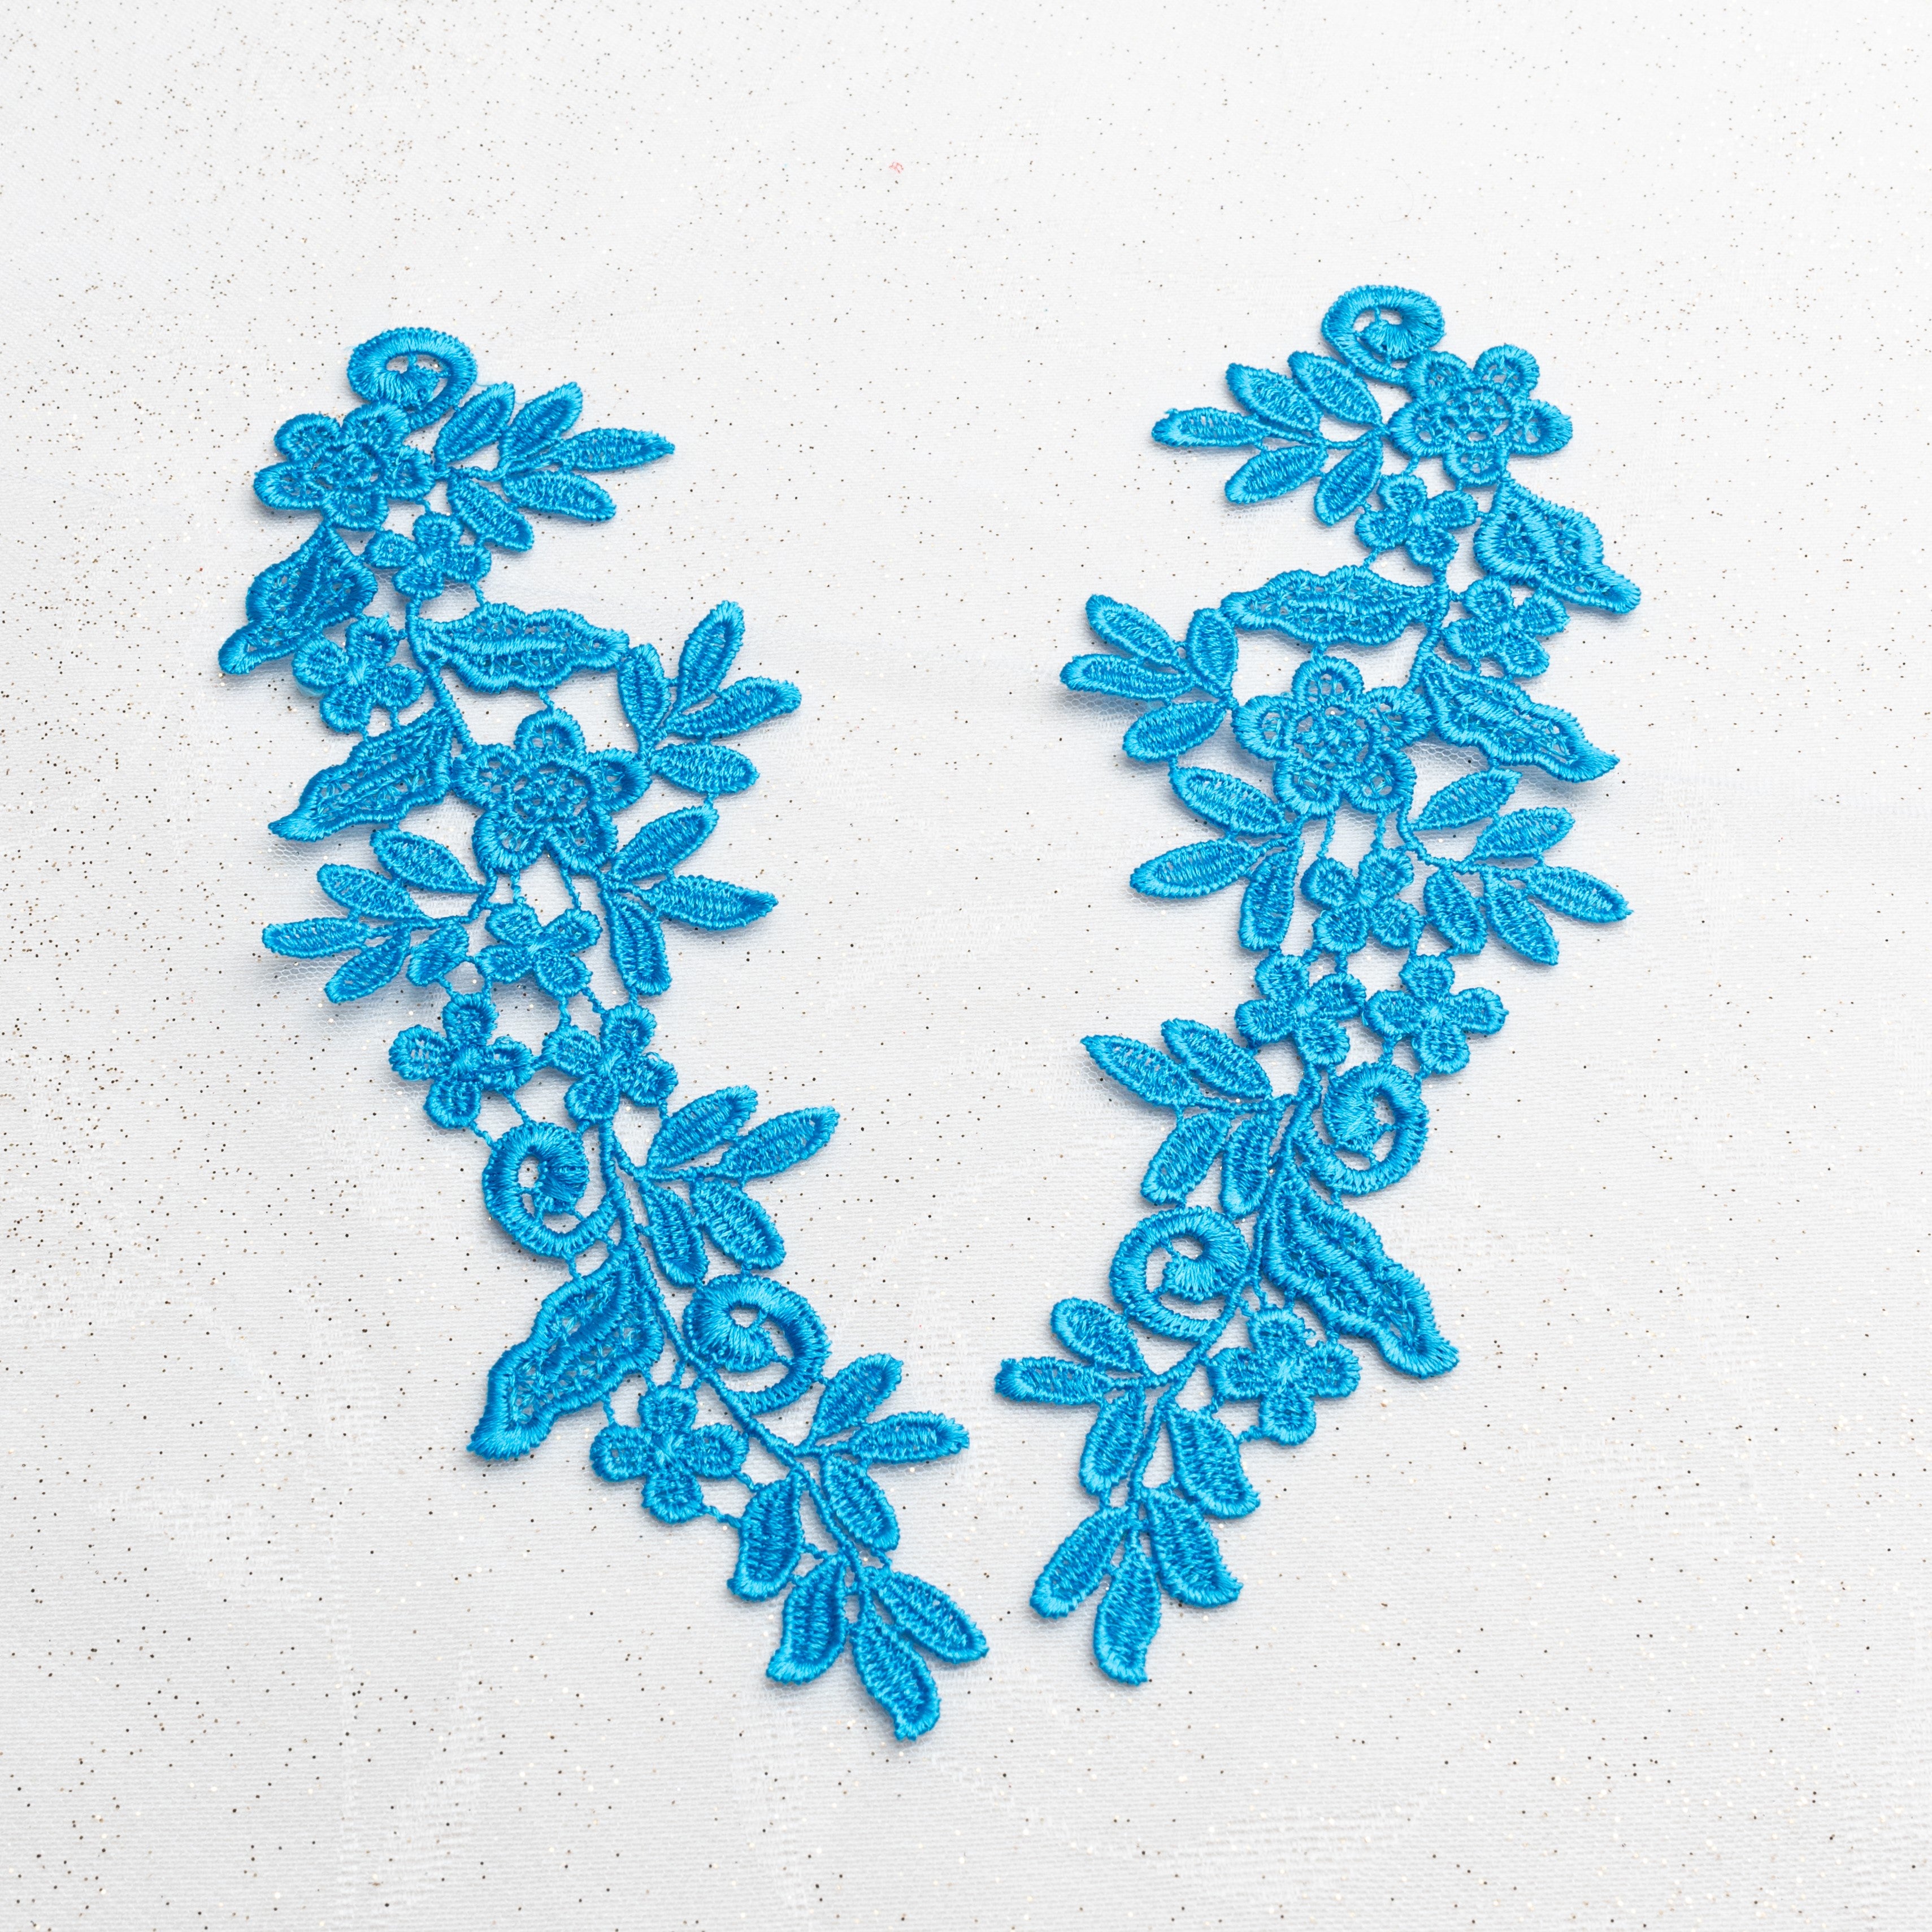 Heavily embroidered blue lace applique pair with a floral design.  This versatile applique pair can be embellished and decorated with crystals, pearls, beads and sequins for beautiful dance and stage costumes